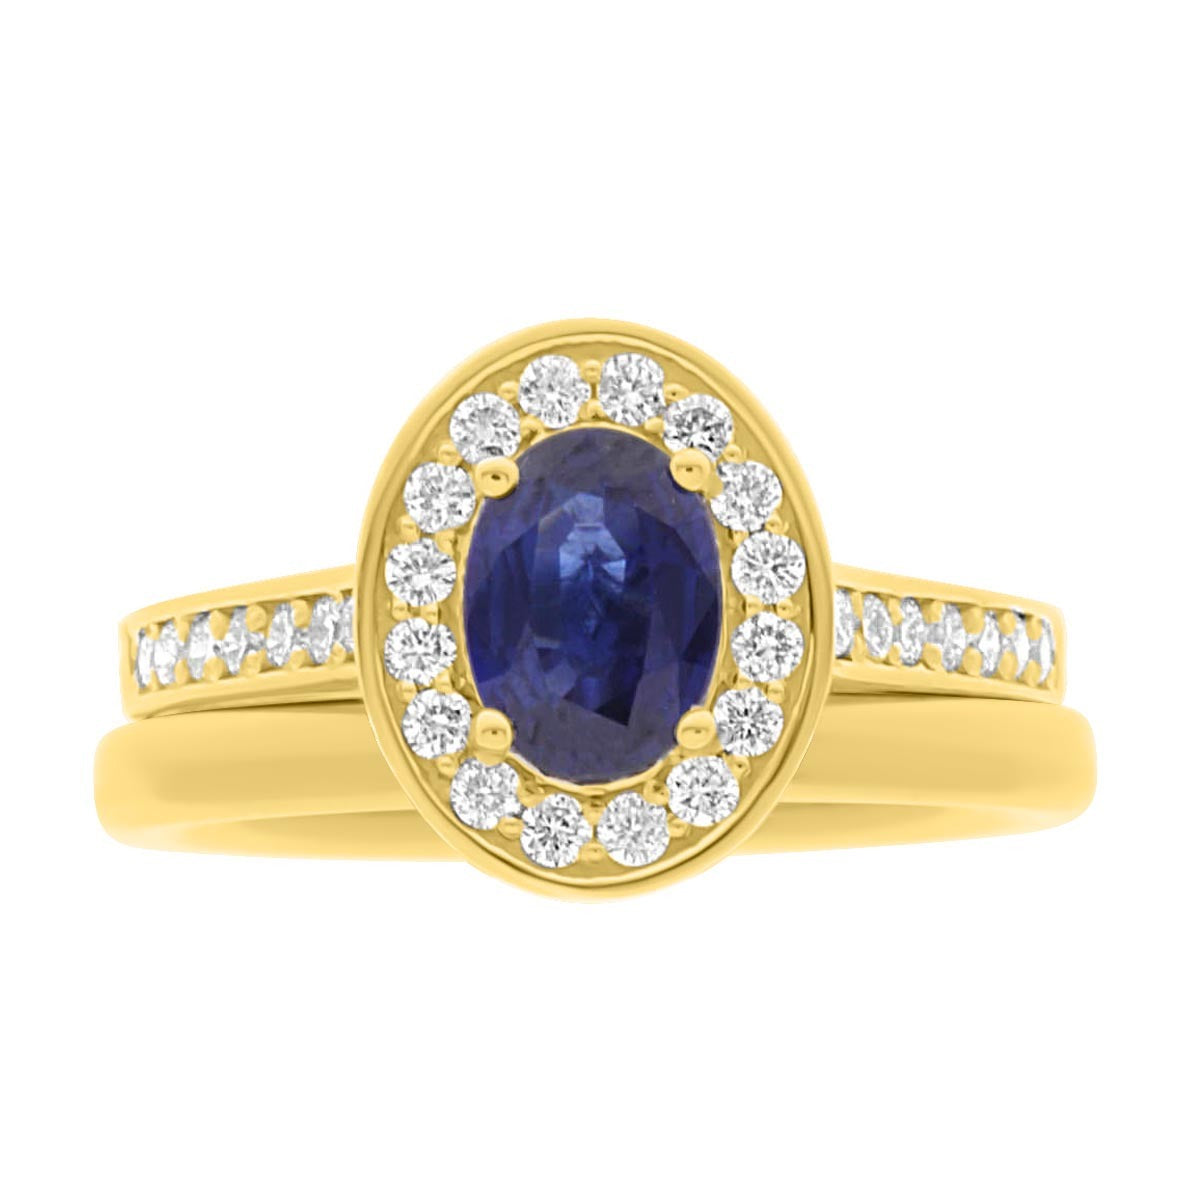 Sapphire Halo Engagement Ring with a matching plain gold wedding ring